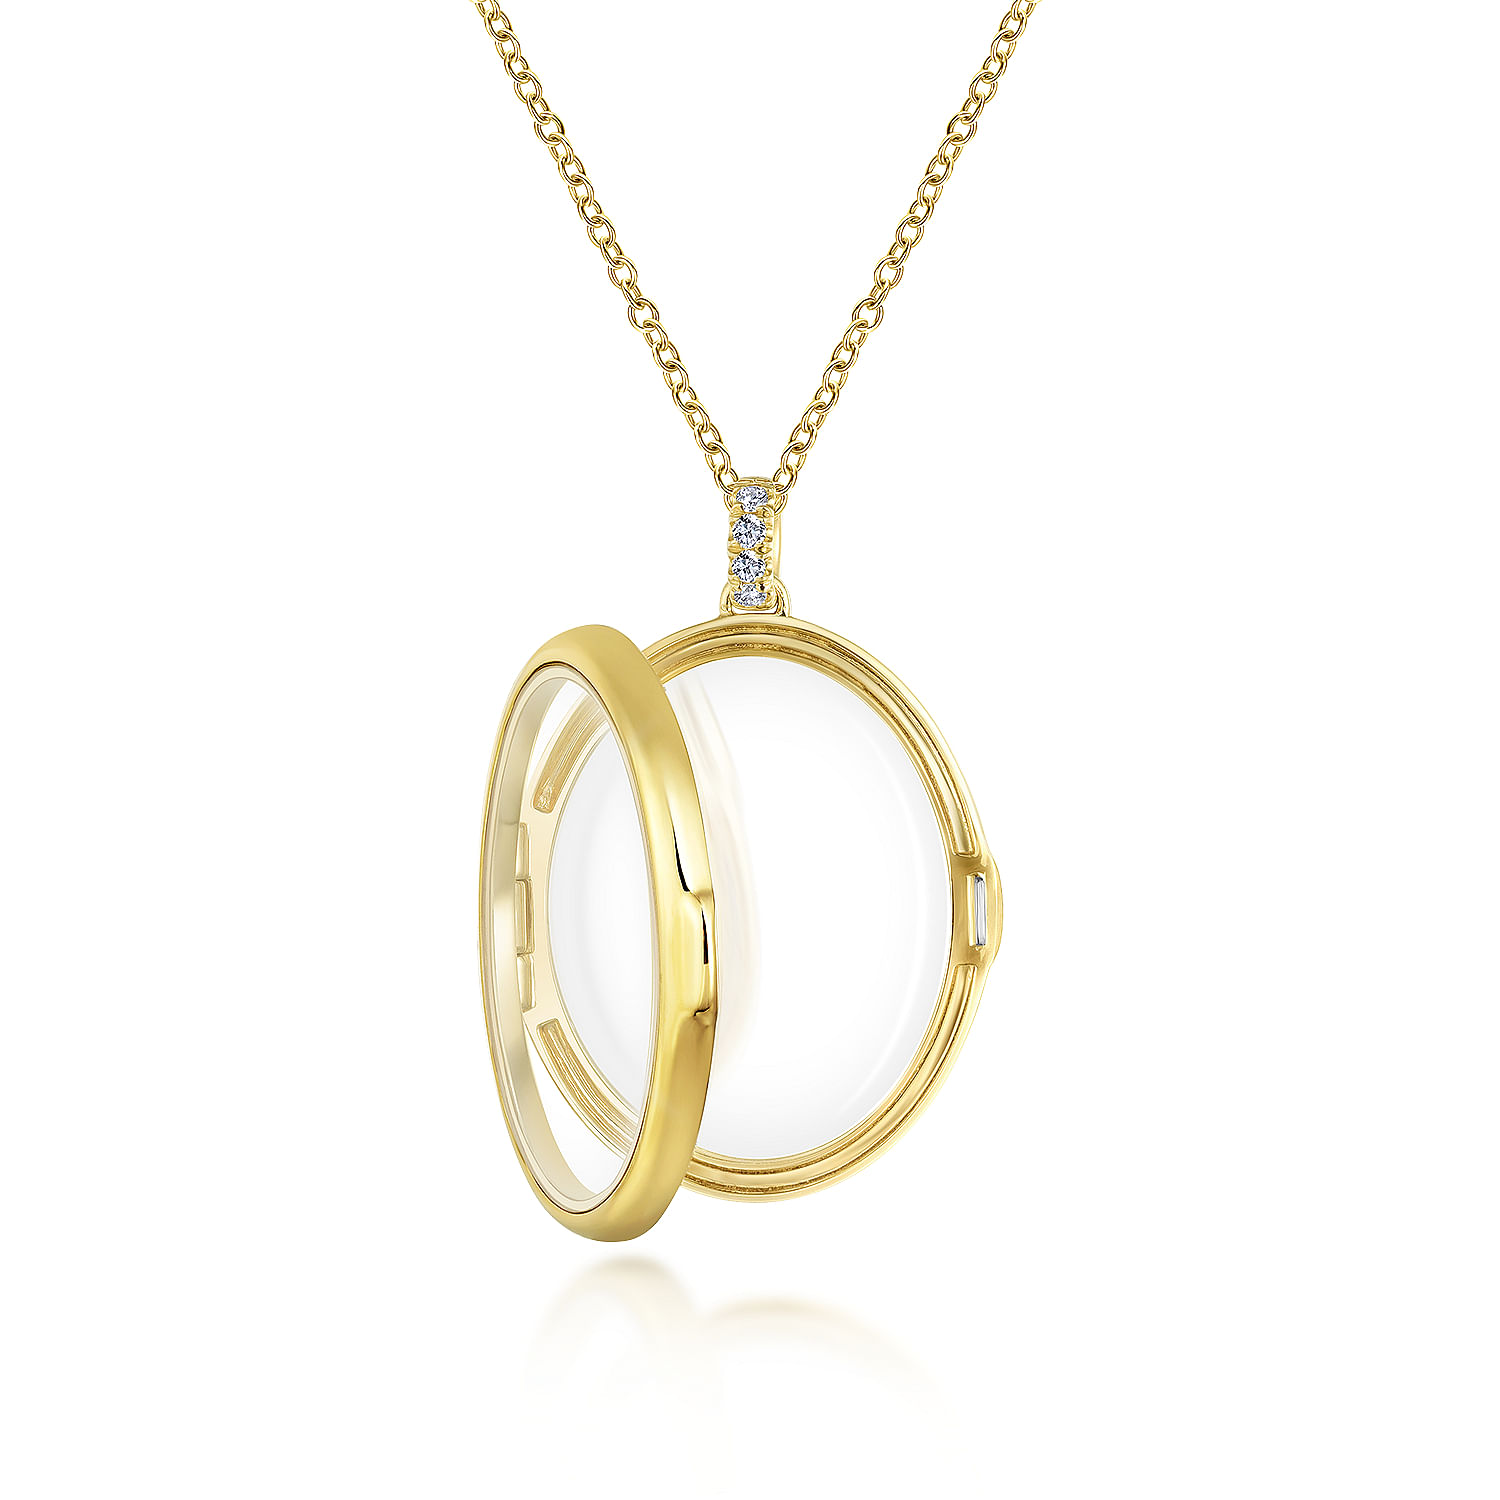 25 inch 14K Yellow Gold Oval Glass Front Locket Necklace